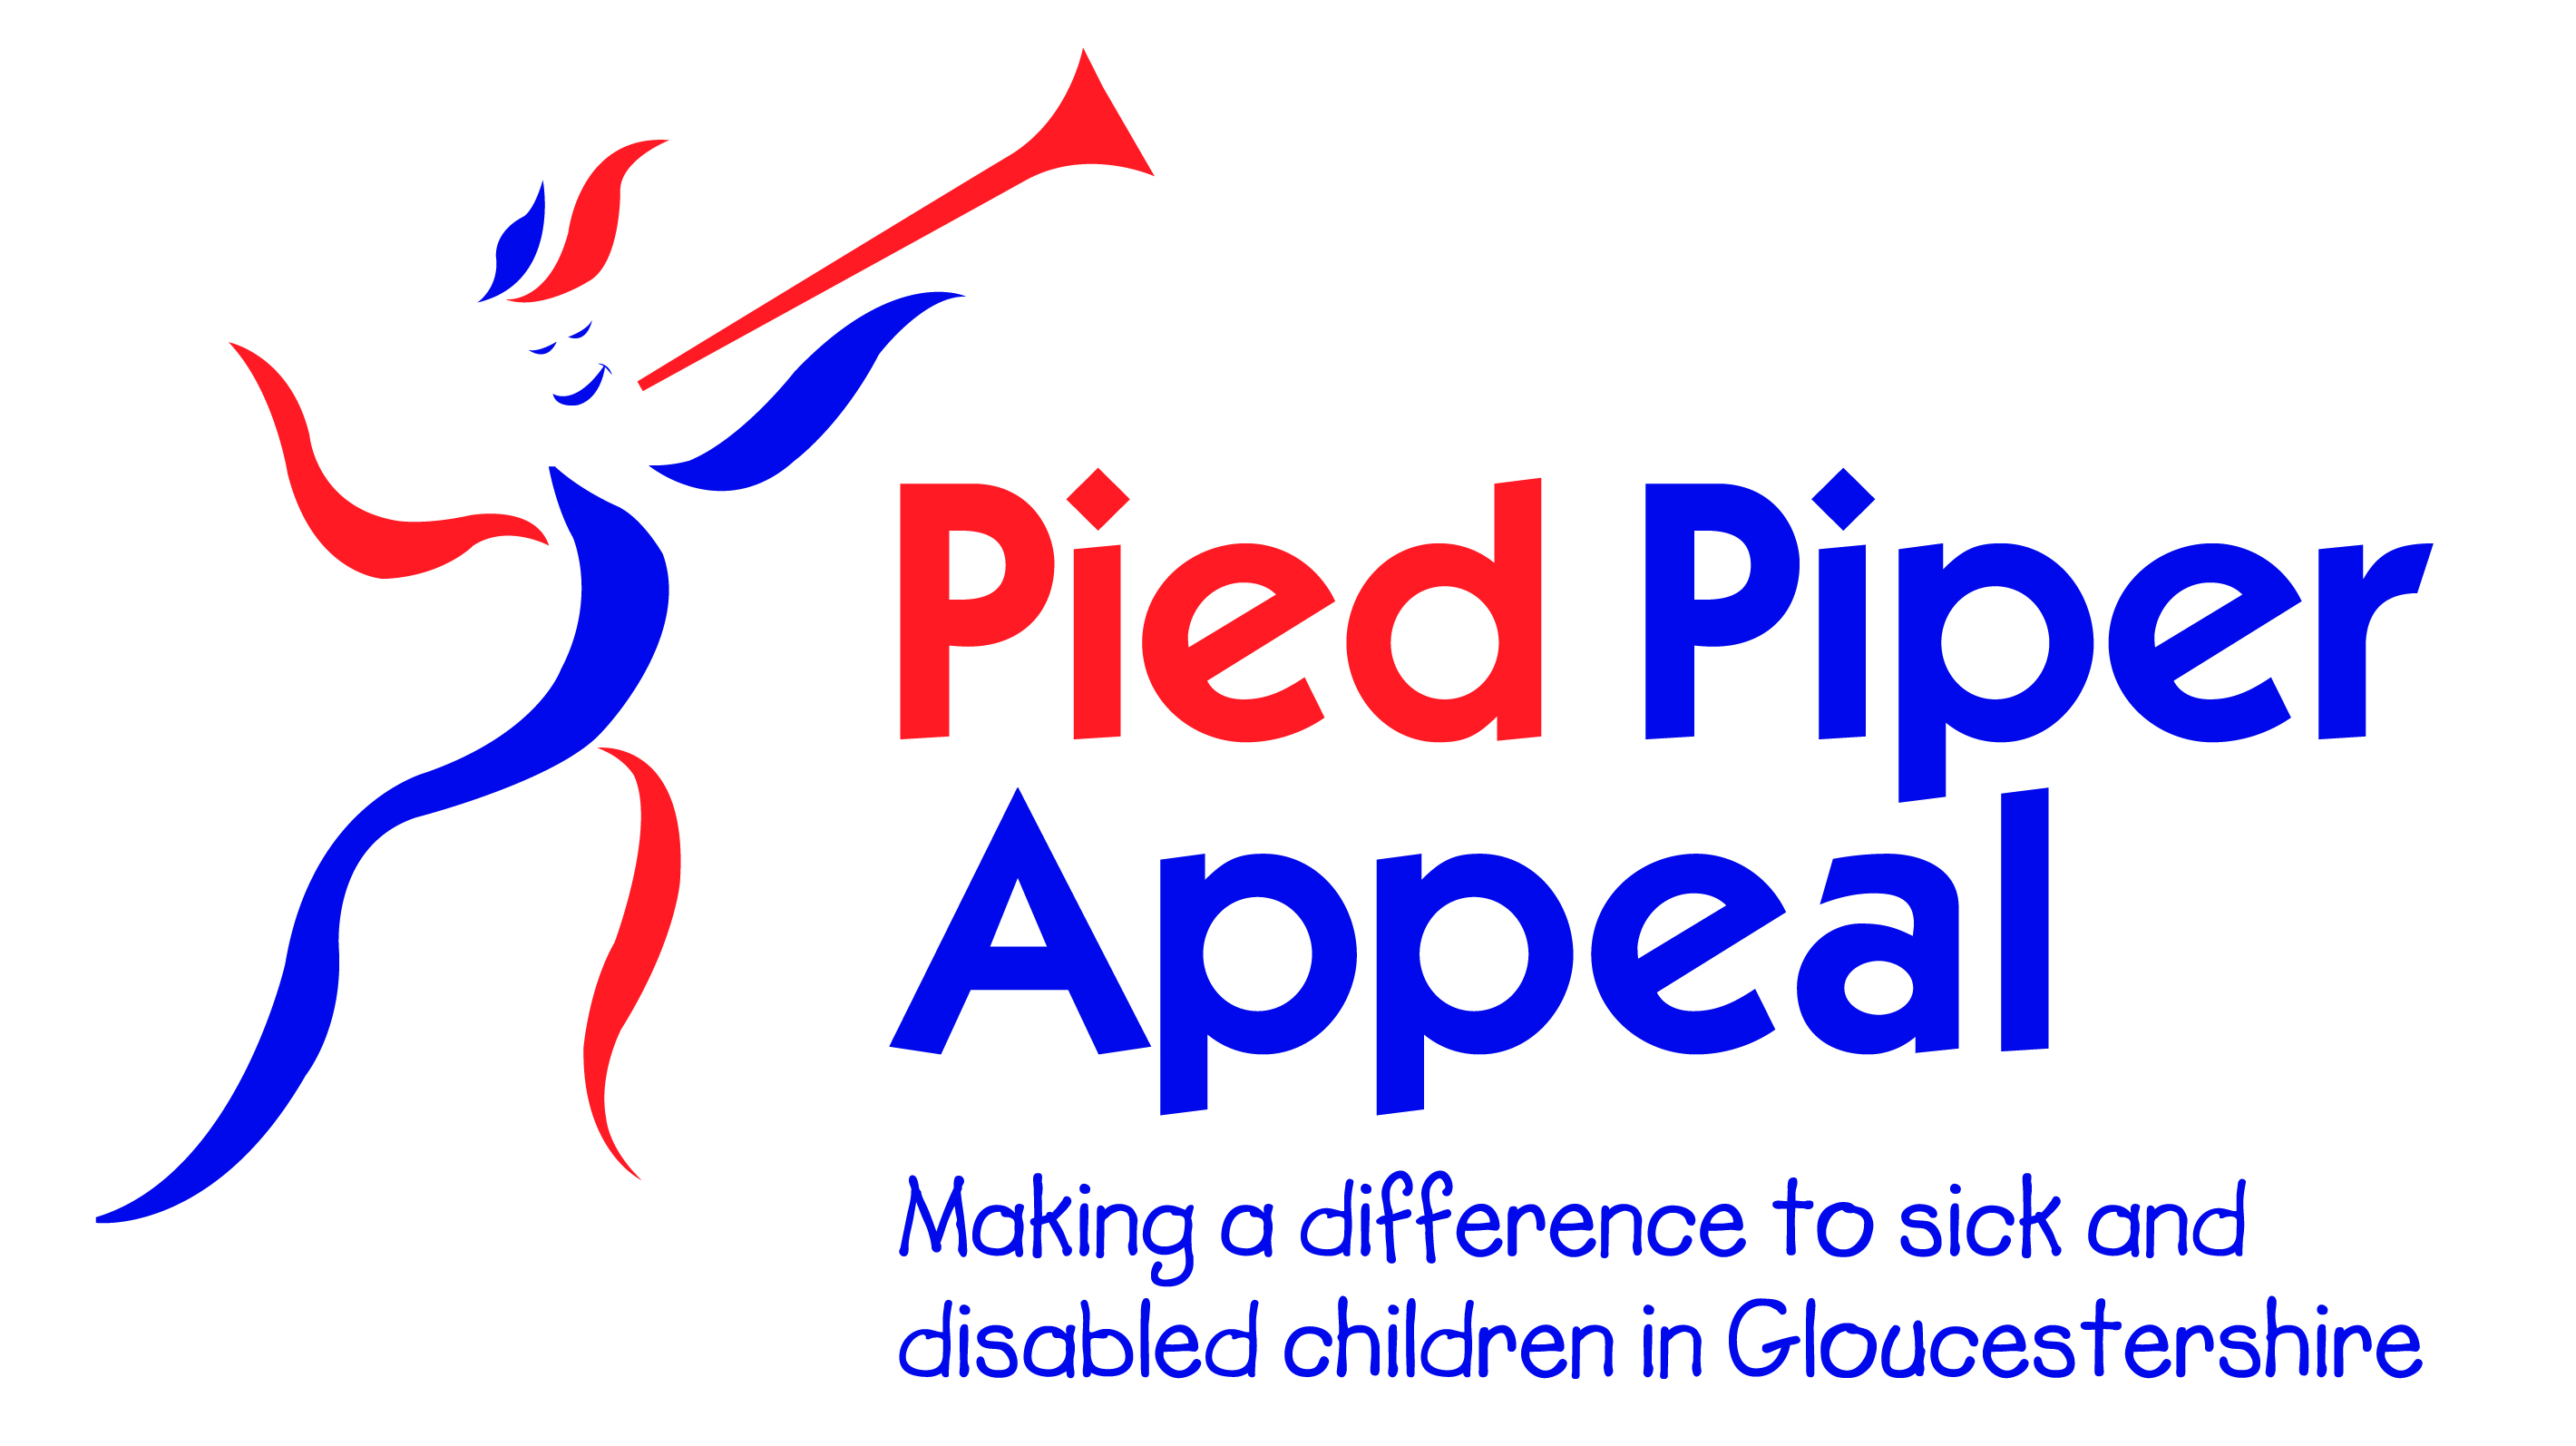 Pied piper appeal